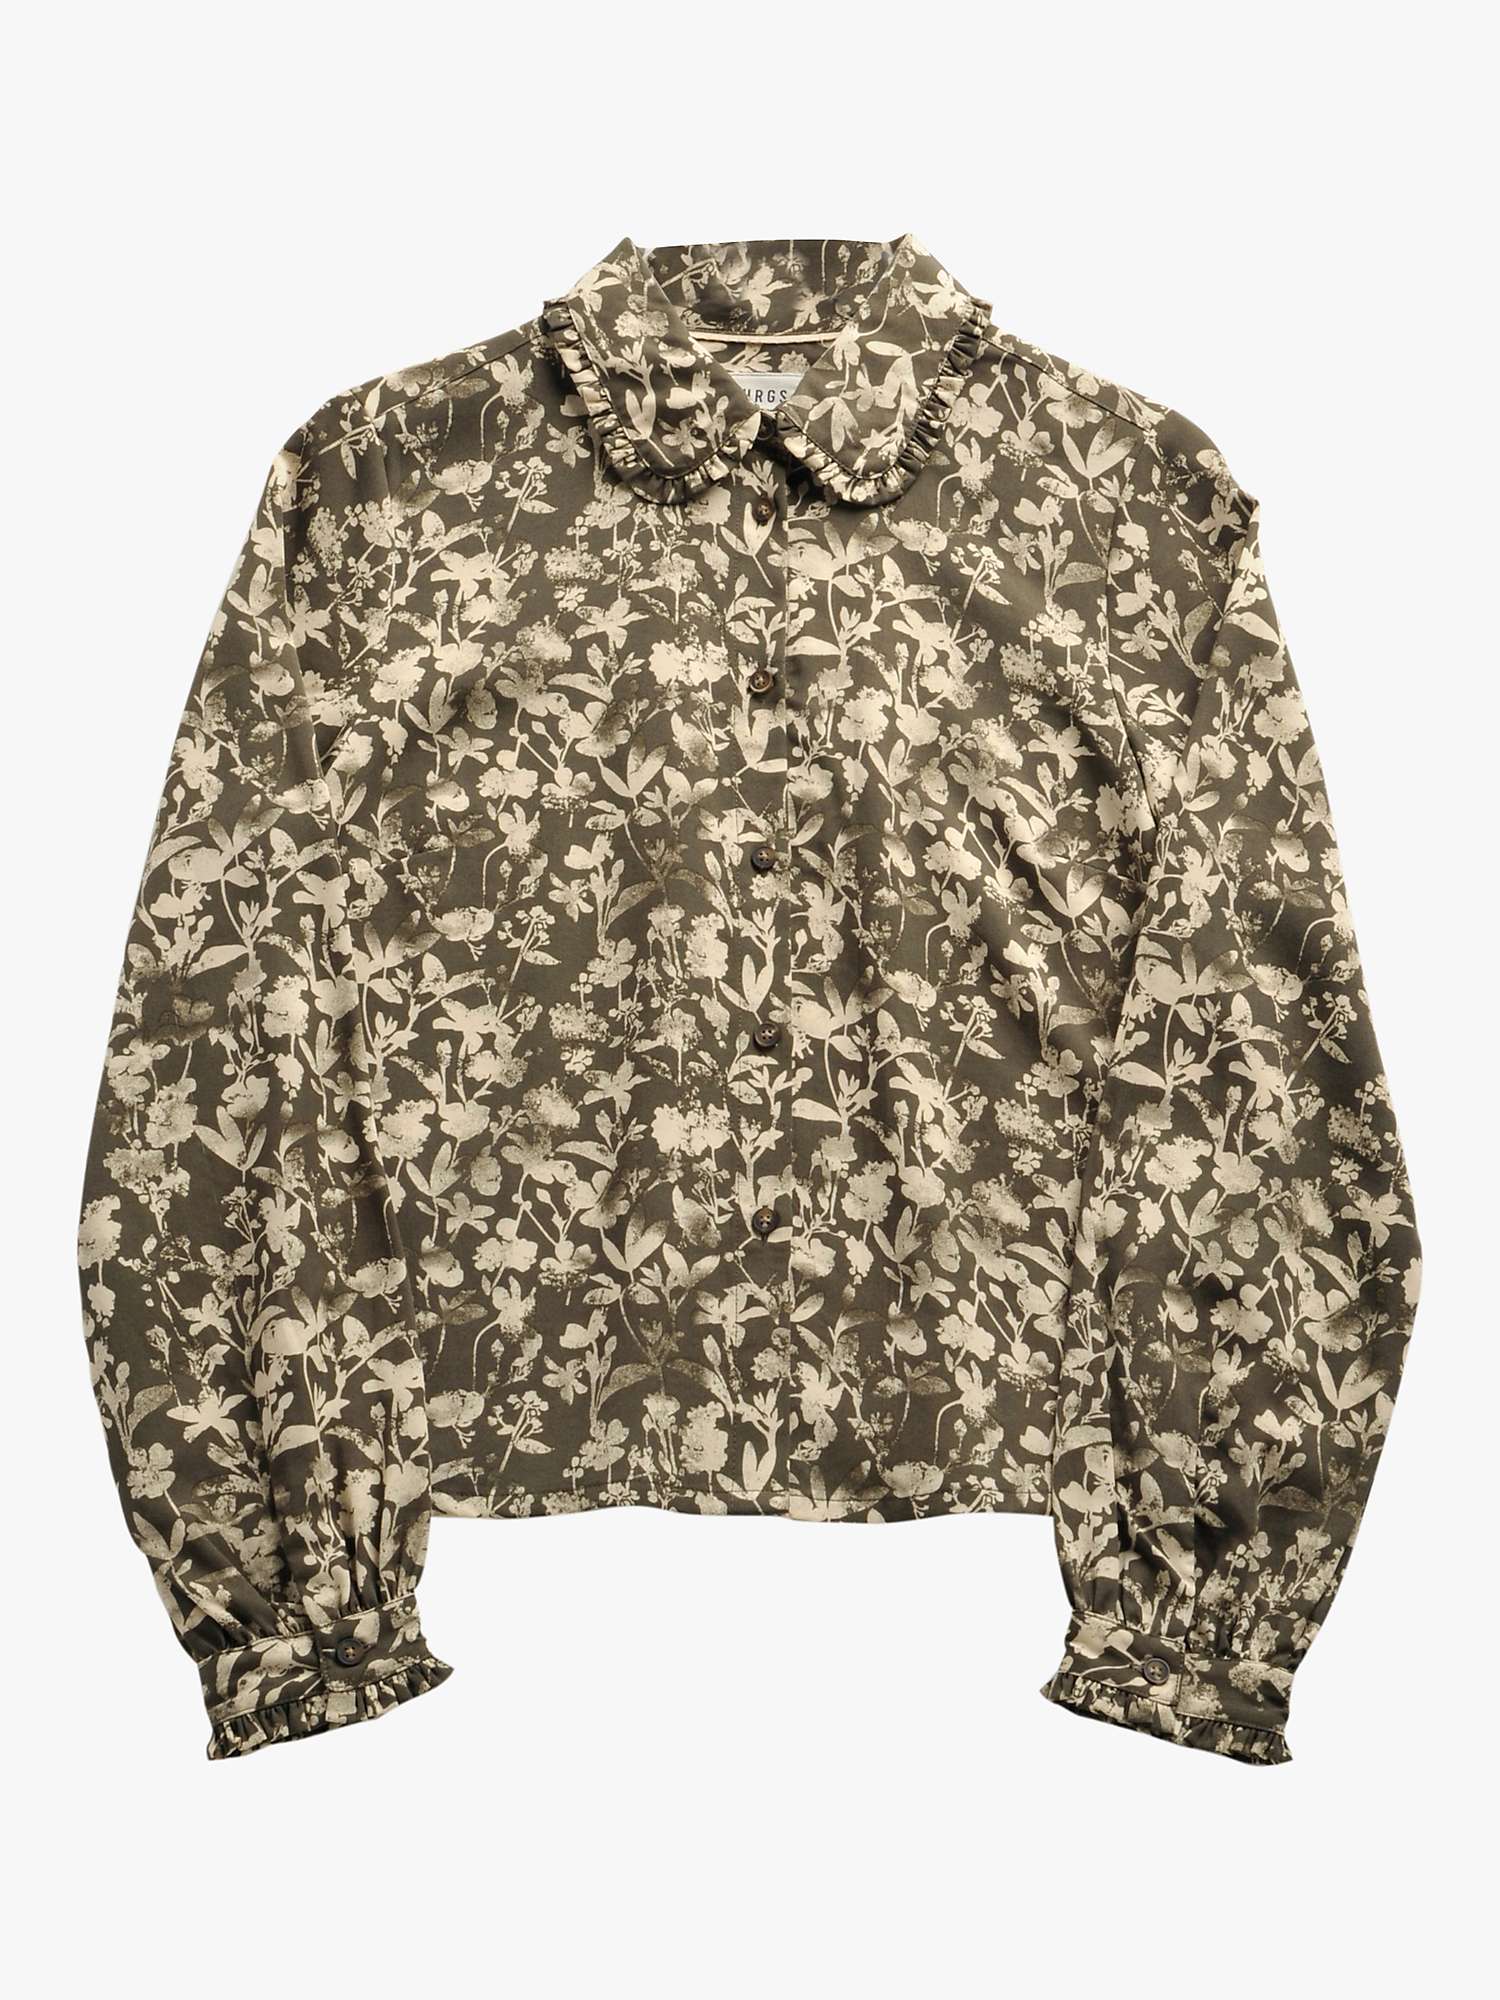 Buy Burgs Bray Floral Blouse, Deep Olive Green Online at johnlewis.com